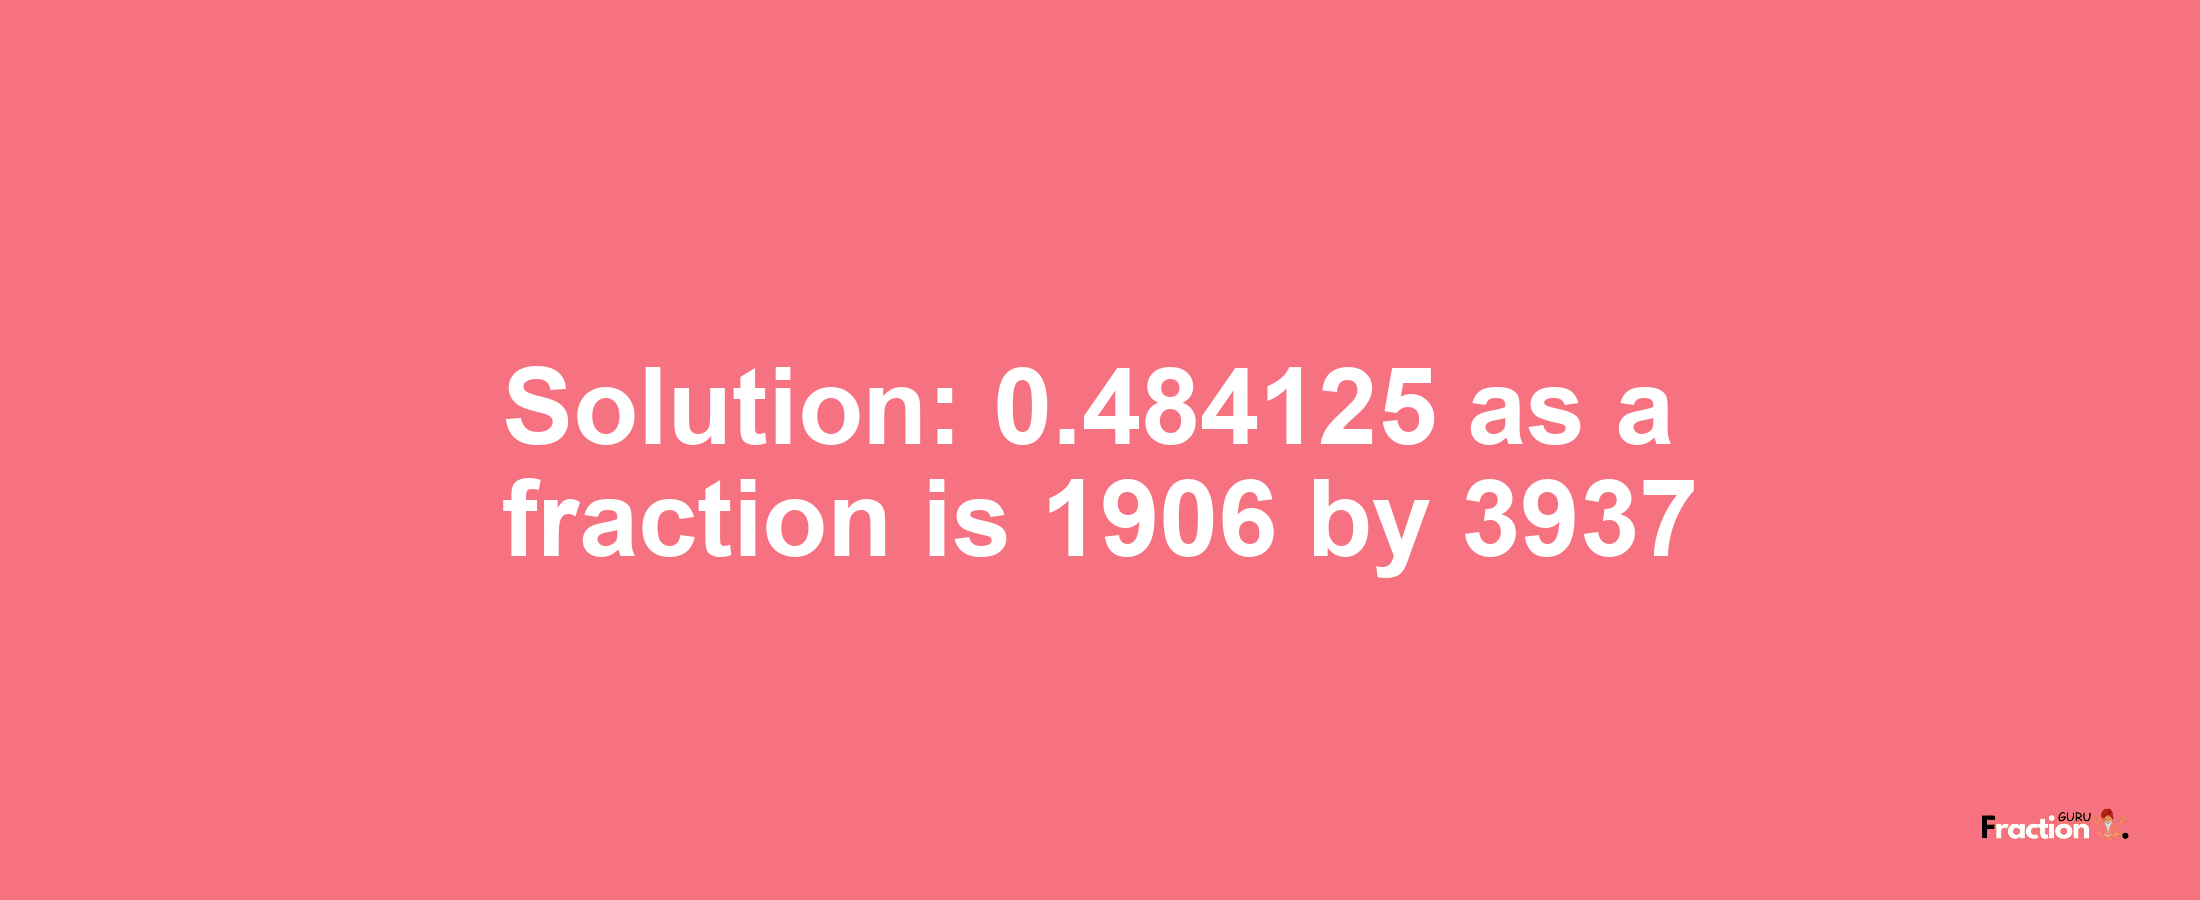 Solution:0.484125 as a fraction is 1906/3937